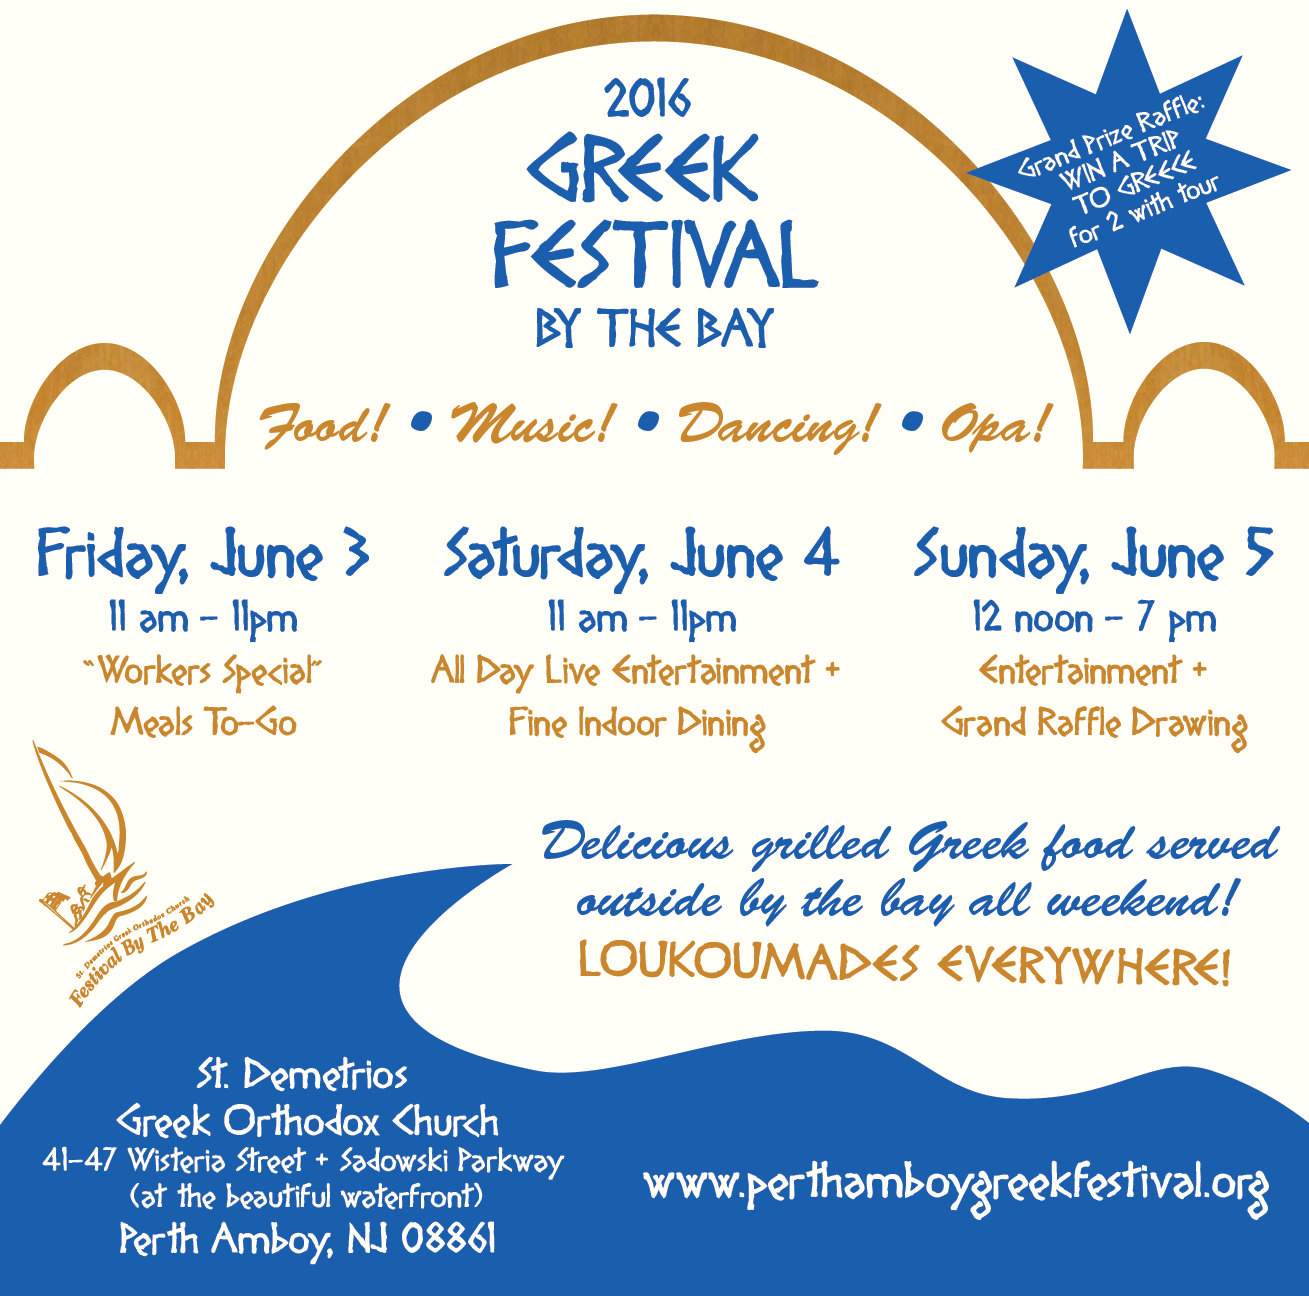 Greek Festival by the Bay, Perth Amboy NJ « Your complete guide to NJ